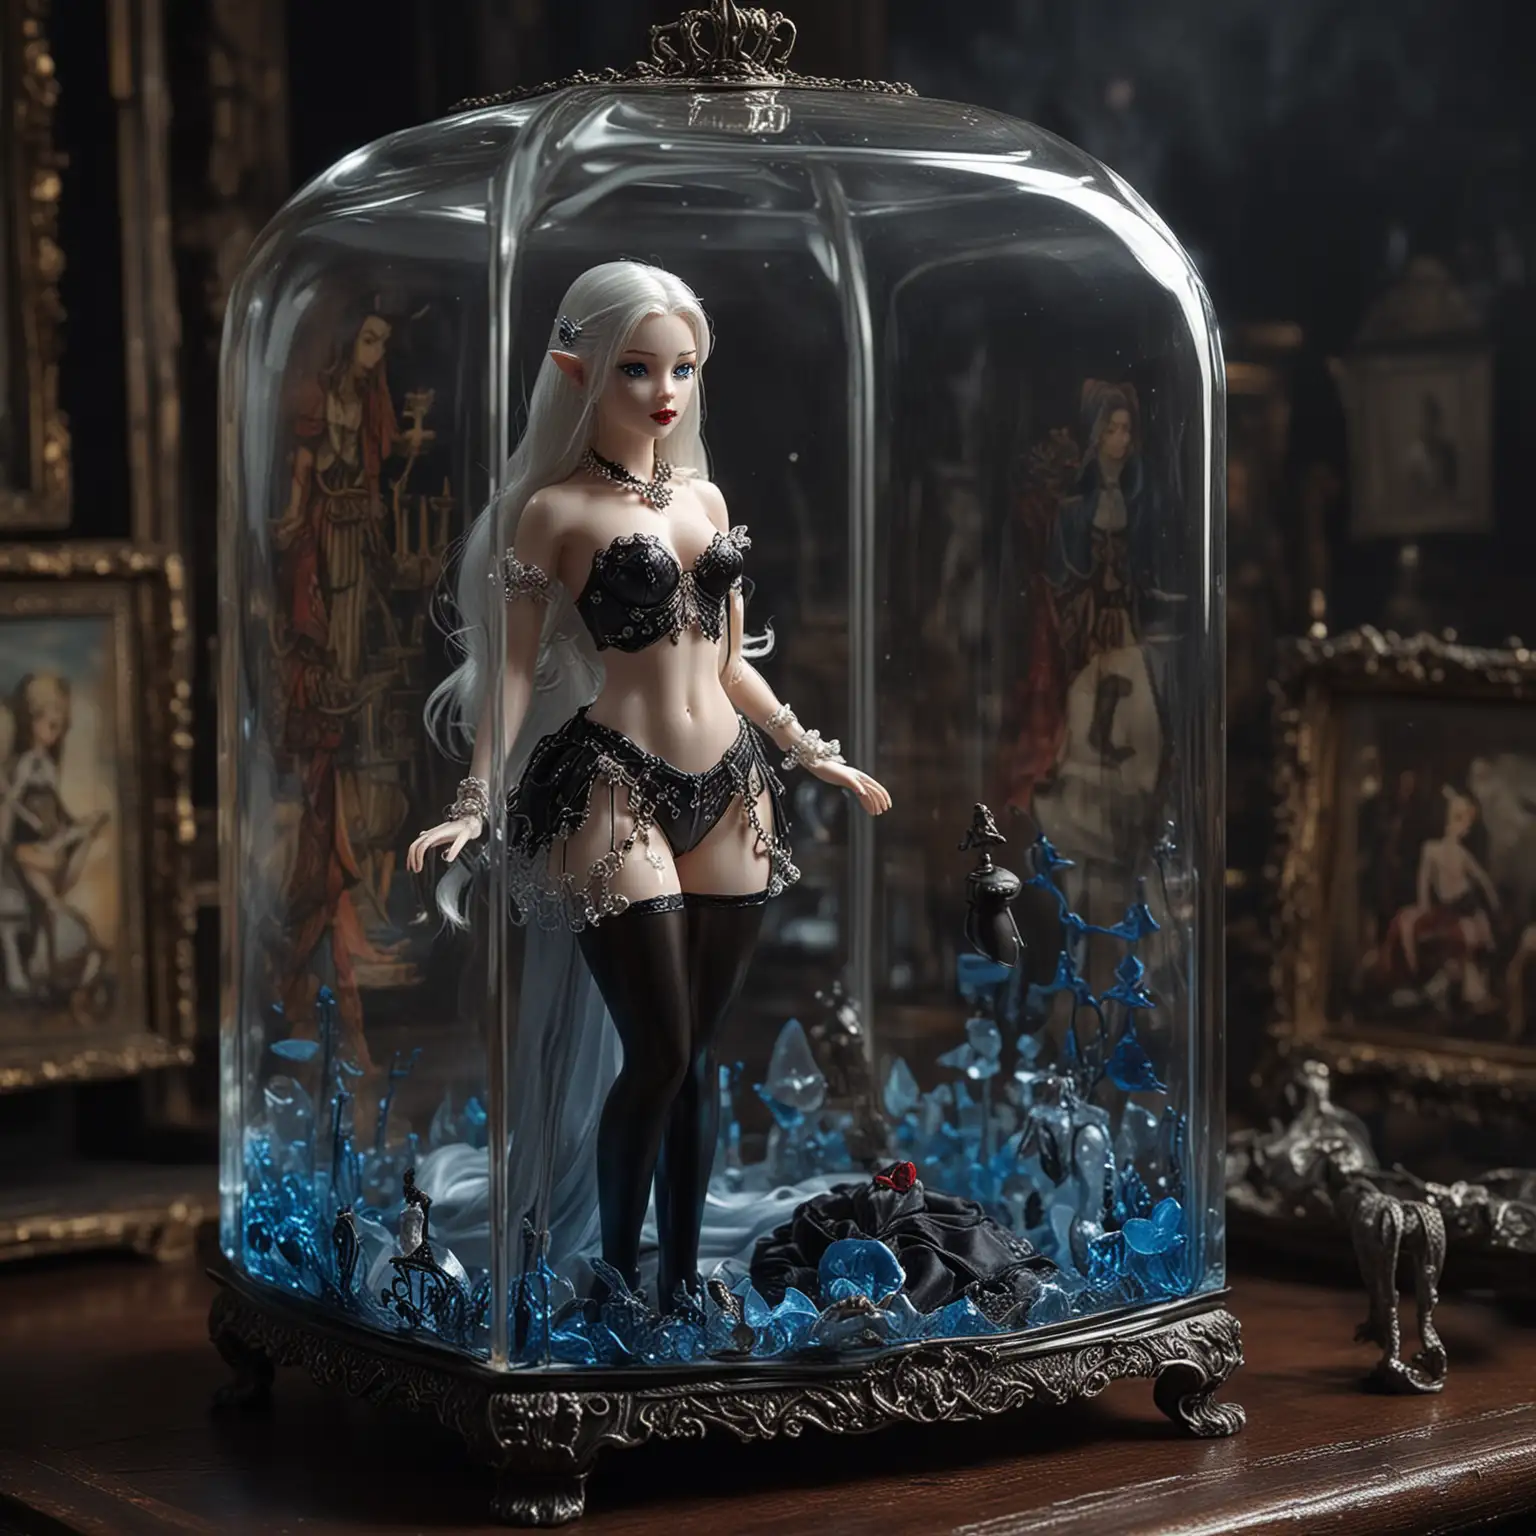 Enchanted Princess Trapped in Miniature Glowing Glass Box Confronts Dark Wizard